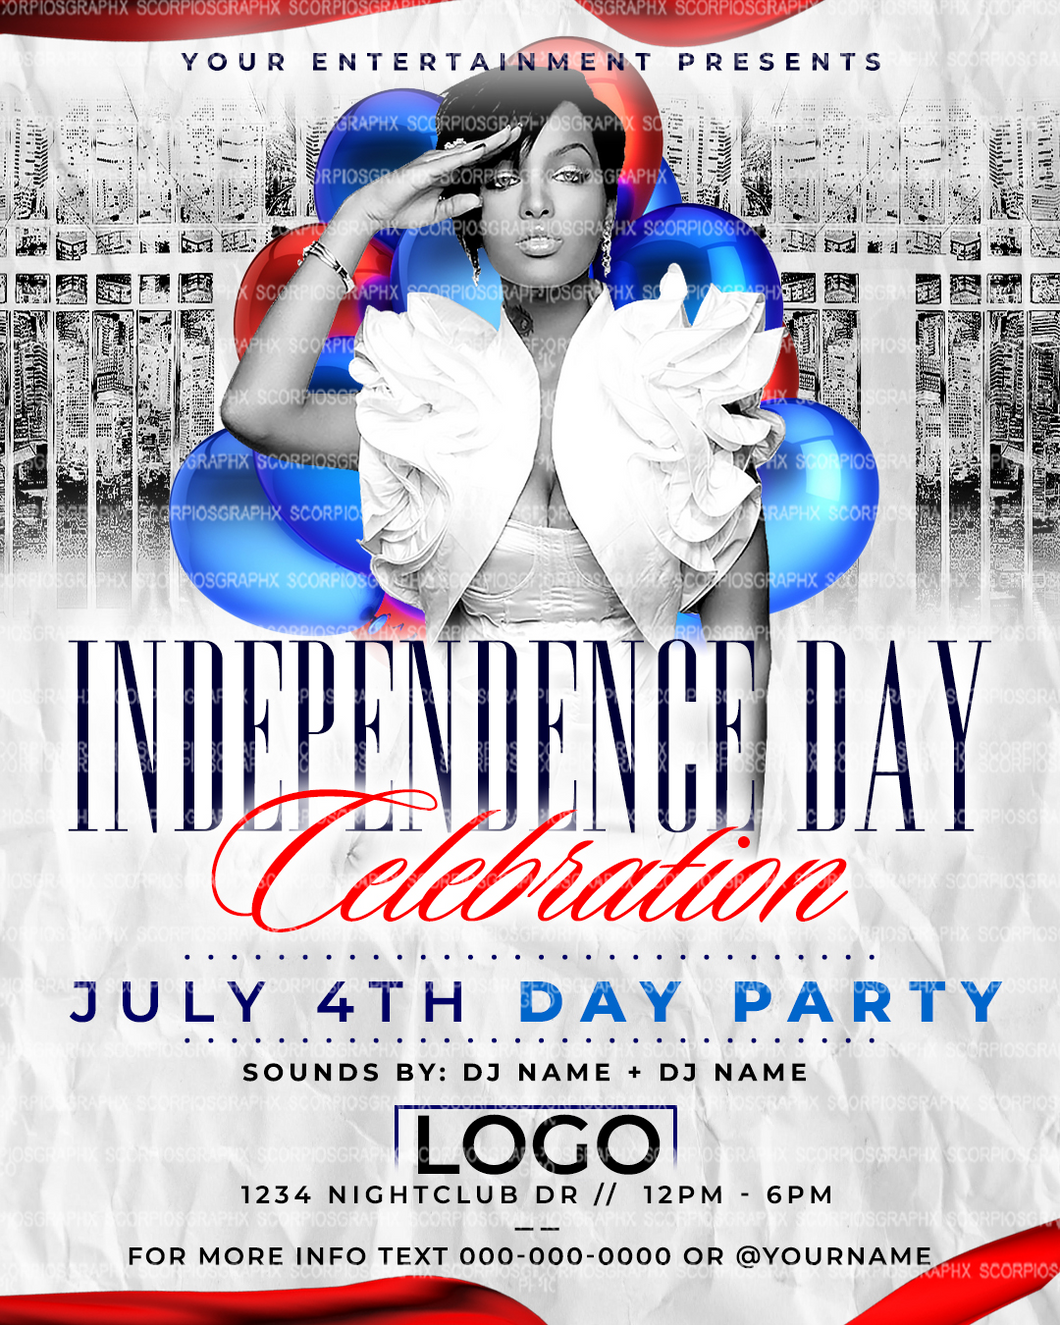 July 4th Day Party Flyer